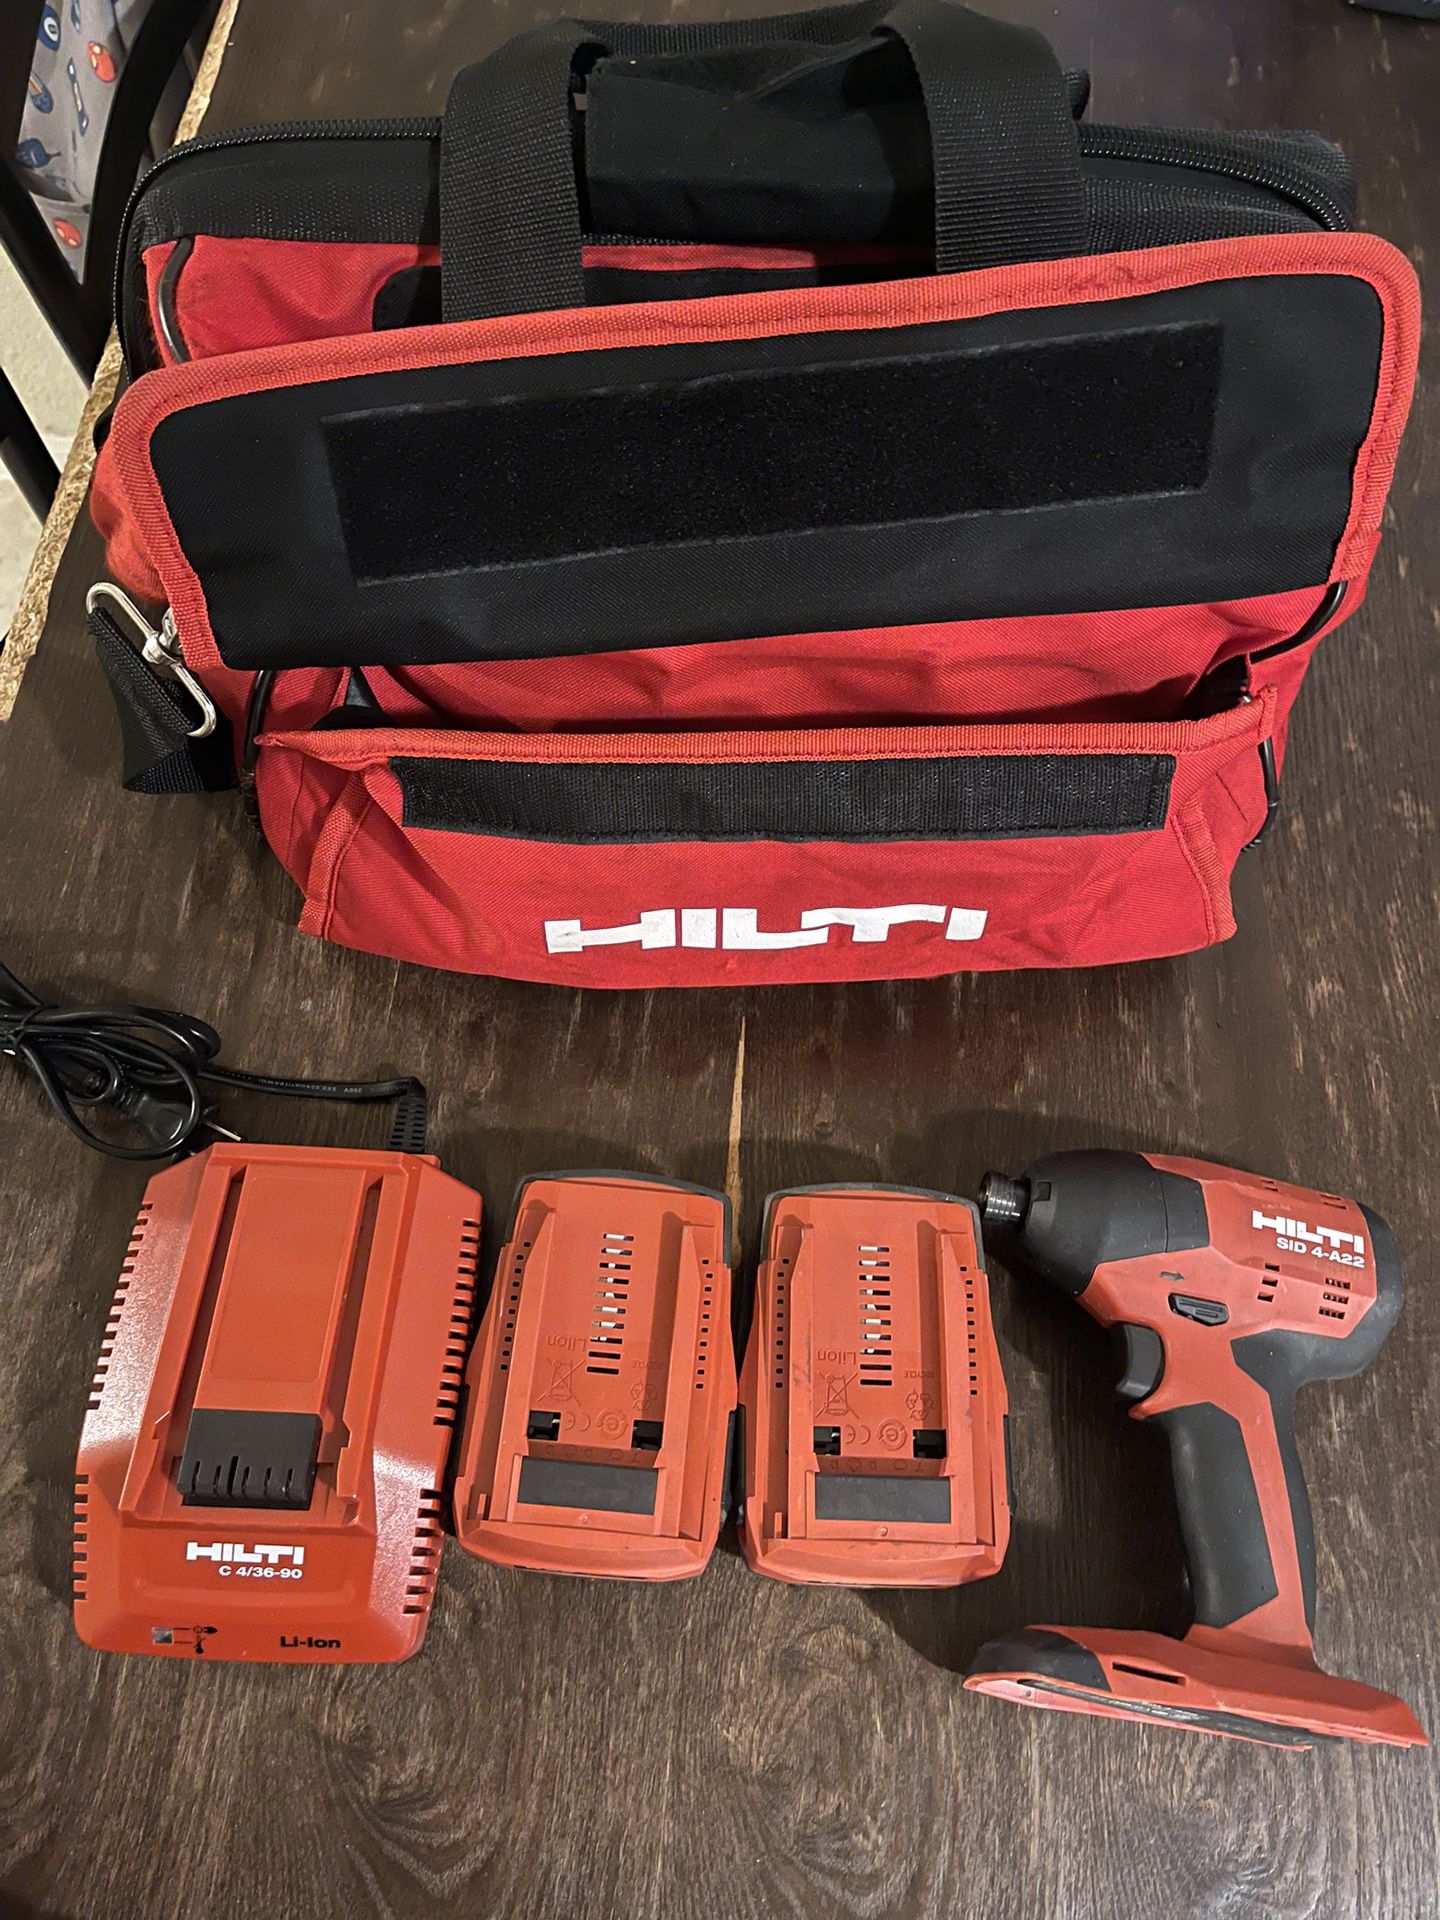 Hilti 22V lithium-ion 1/4 With Tools bags 